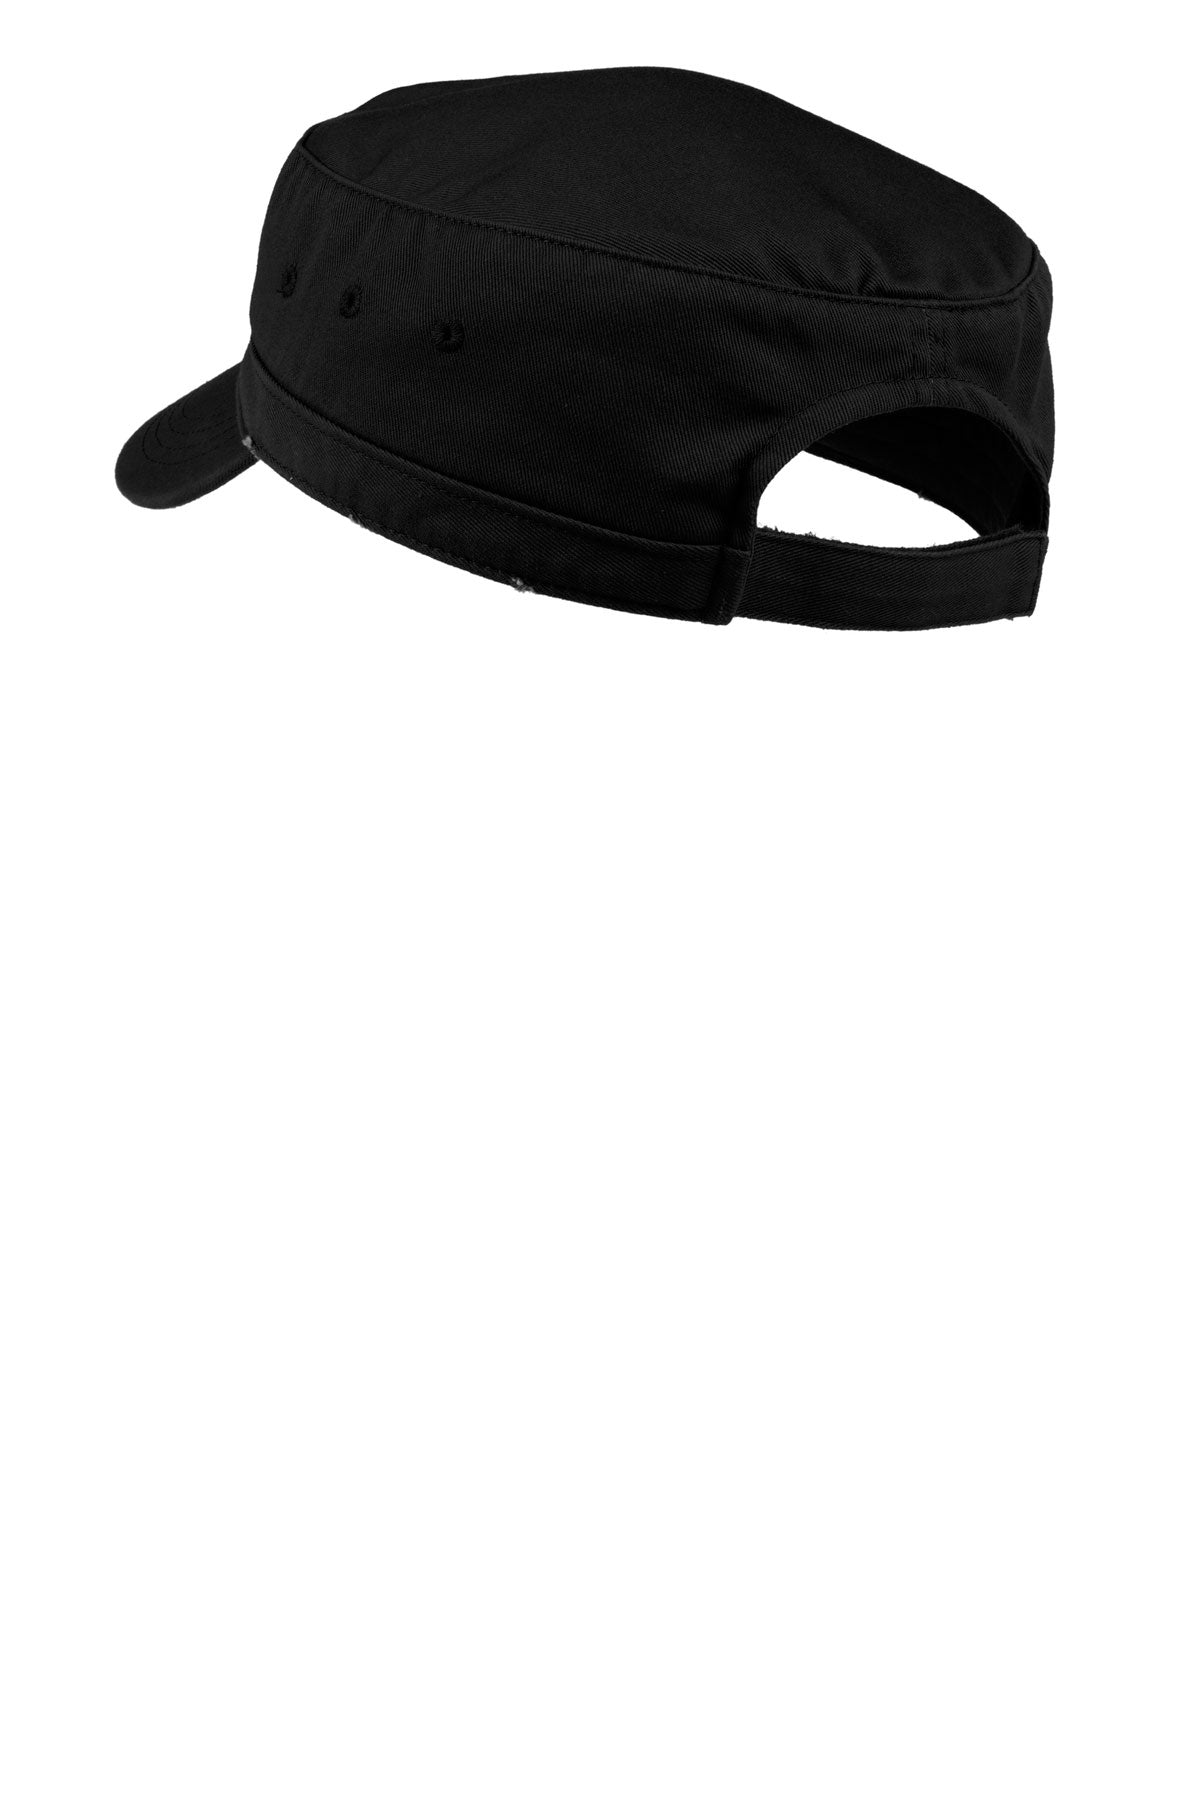 District Distressed Military Hats, Black